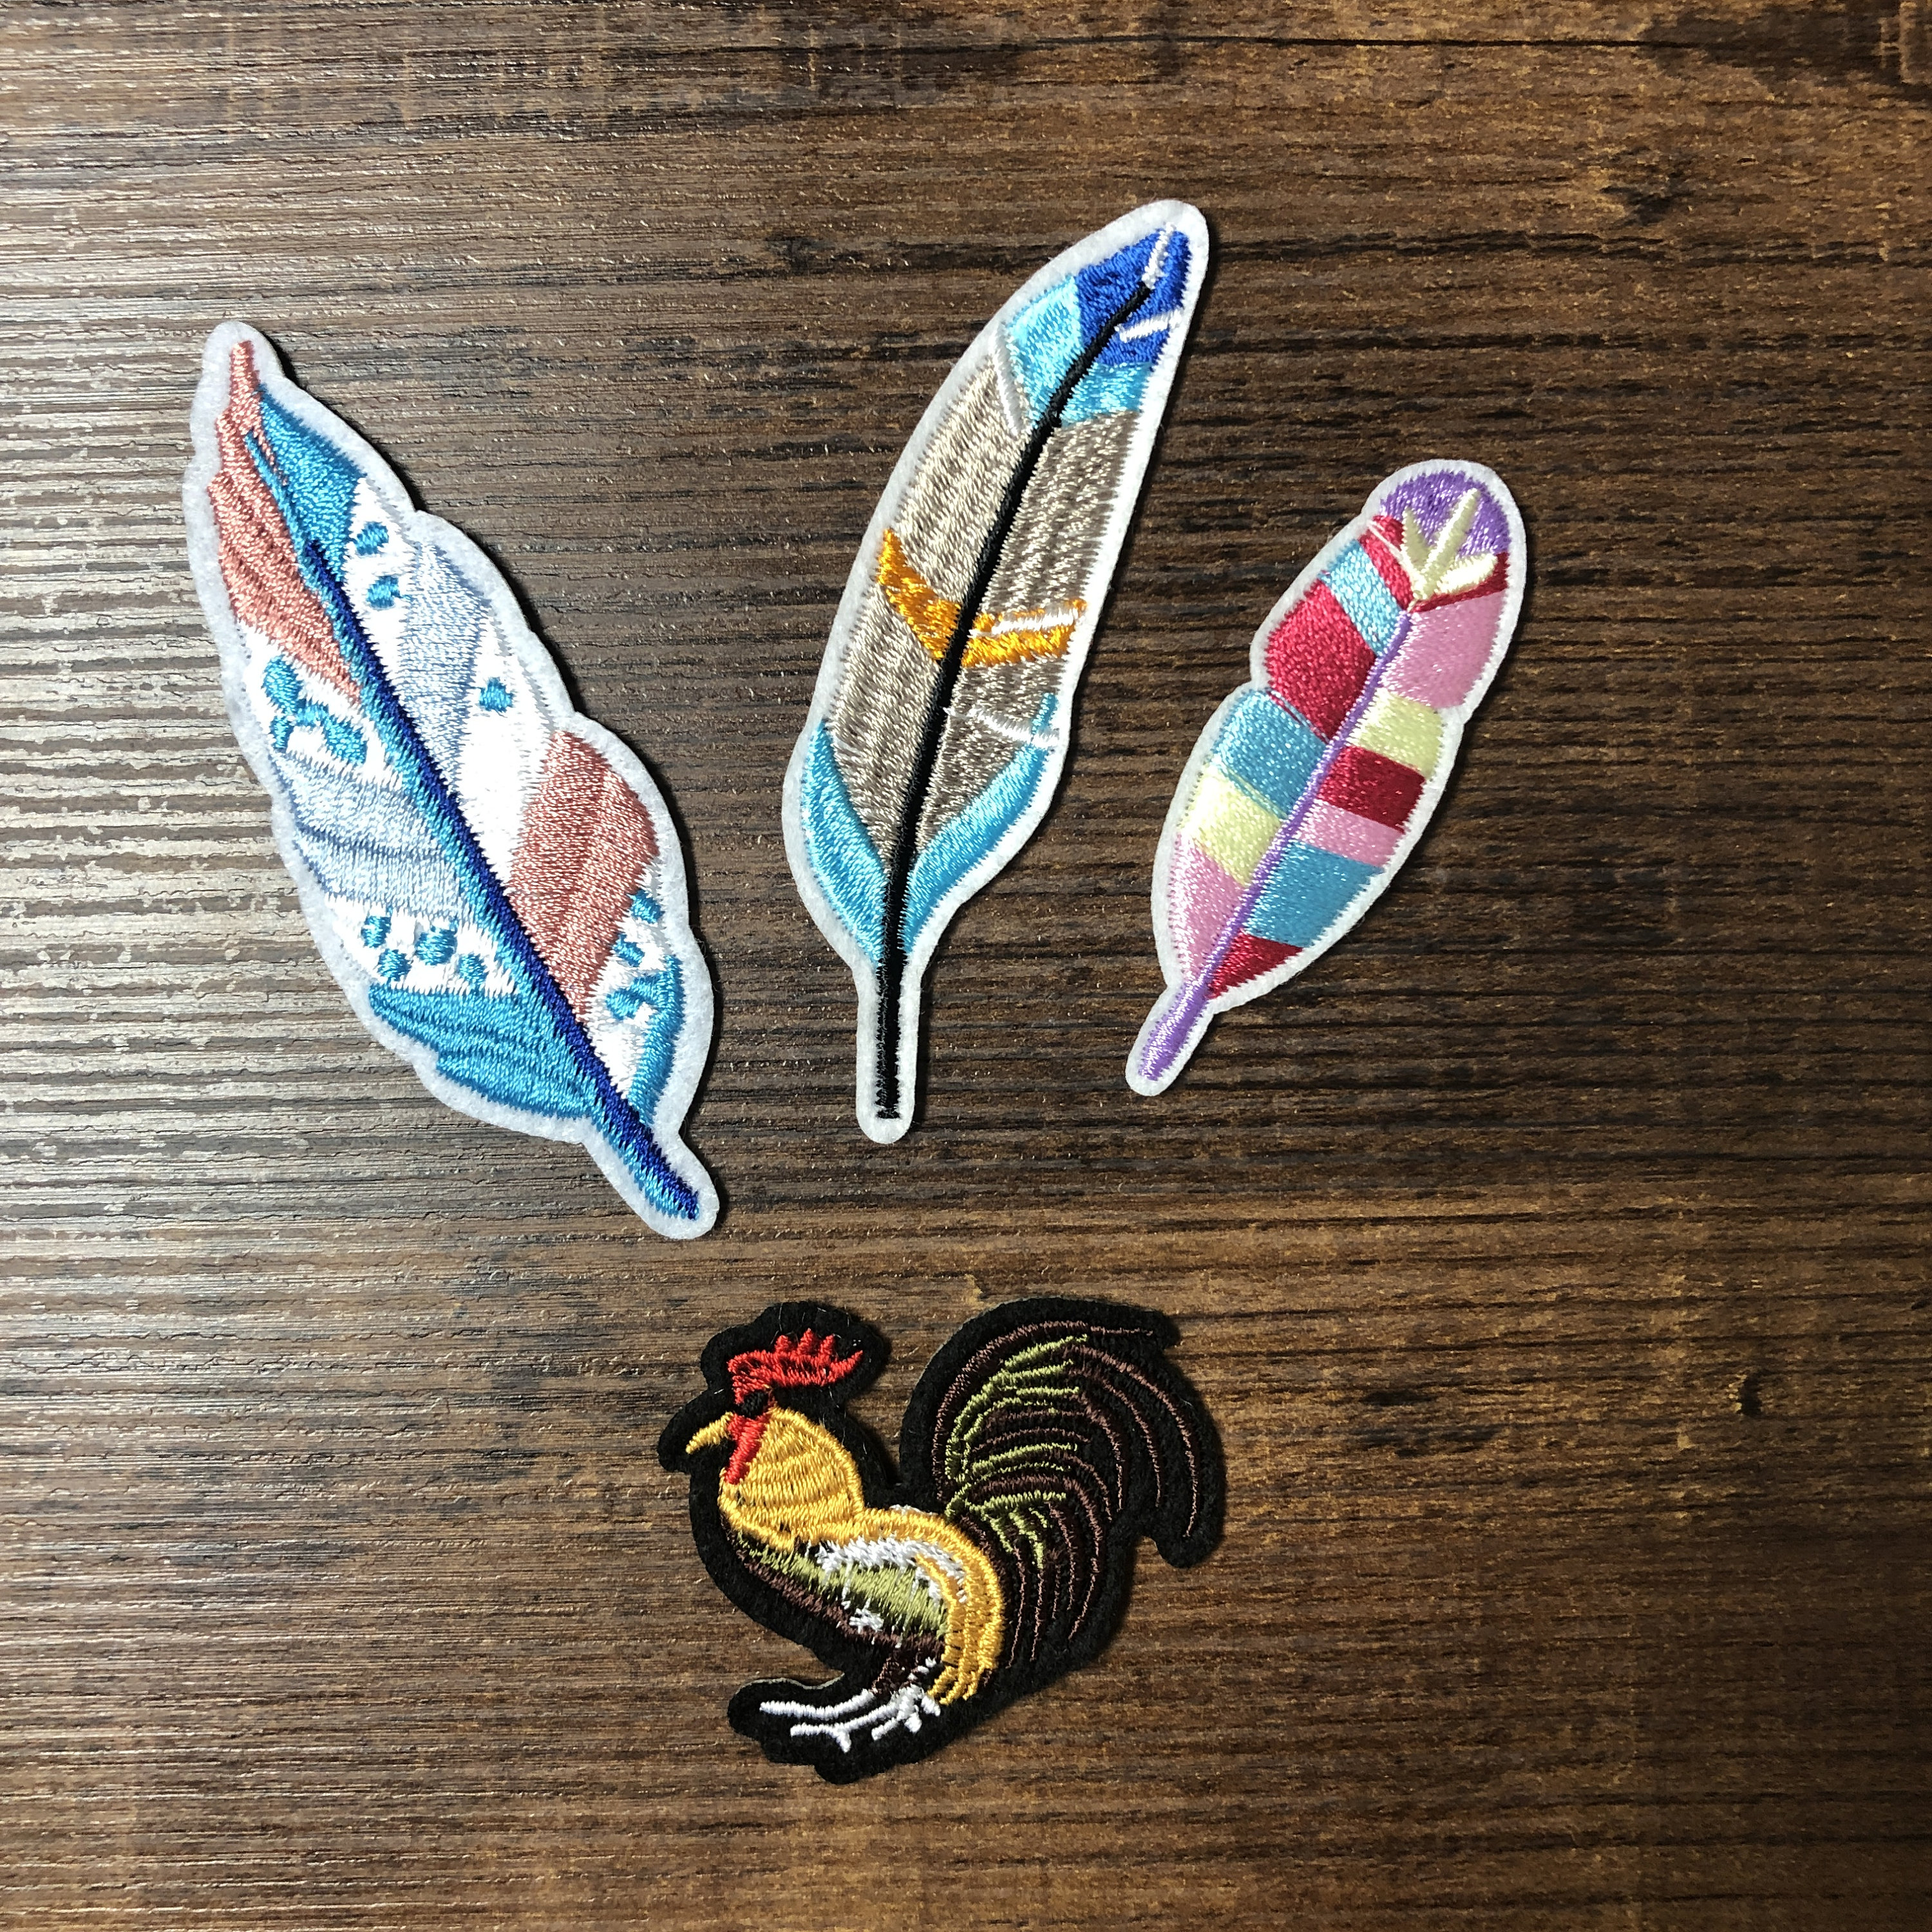 embroidery, patches, chicken, bird, friend, cottagecore, farming, customize, feather, snug The Essentials embroidered iron-on patch set